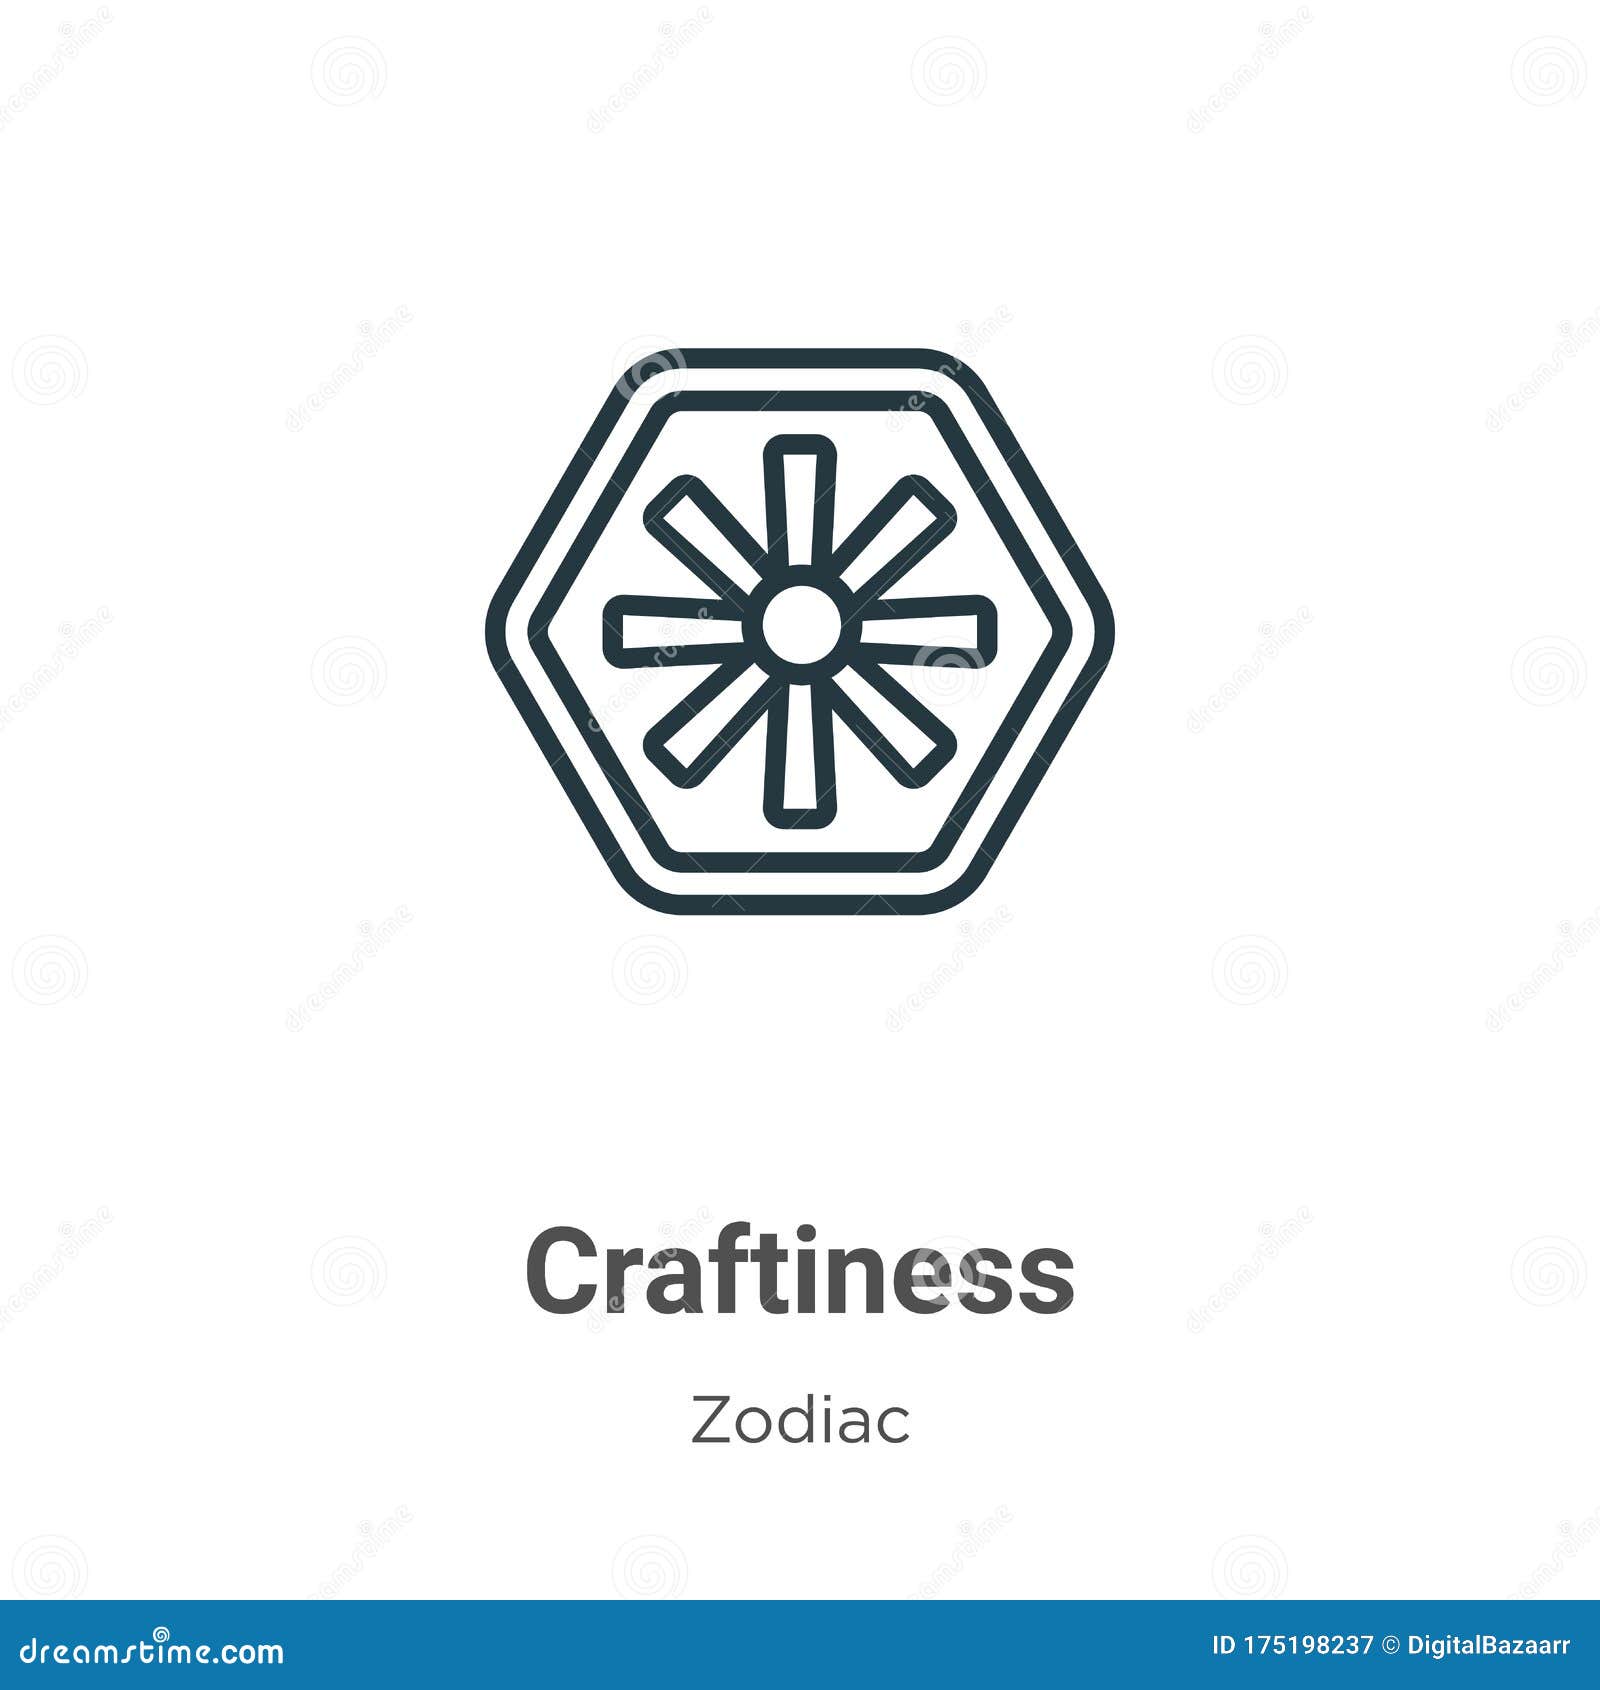 craftiness outline  icon. thin line black craftiness icon, flat  simple   from editable zodiac